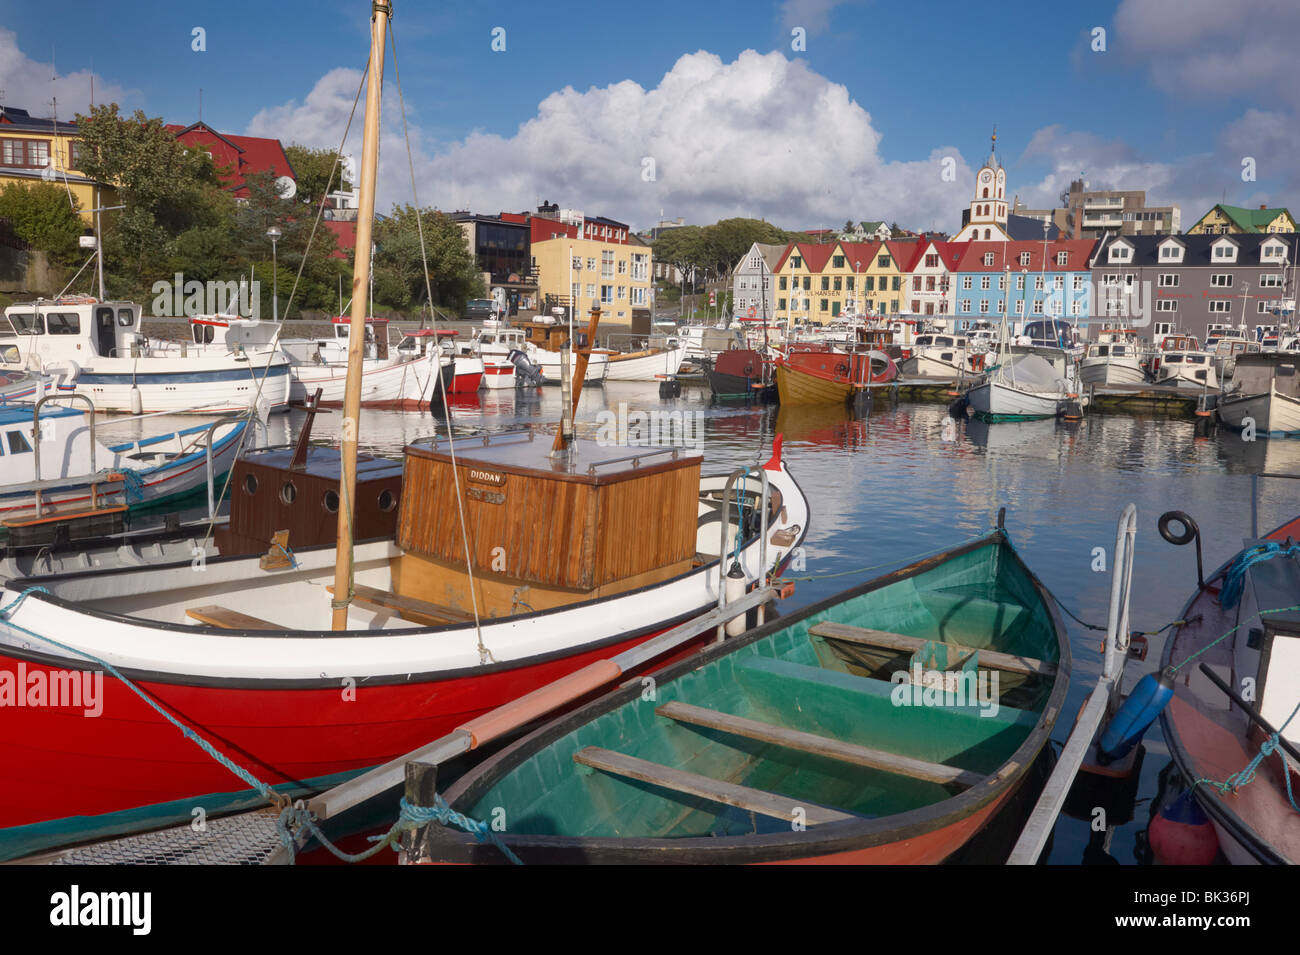 Colourful boats and picturesque gabled buildings along the quayside in Vestaravag harbour, Torshavn, Streymoy, Faroe Islands Stock Photo